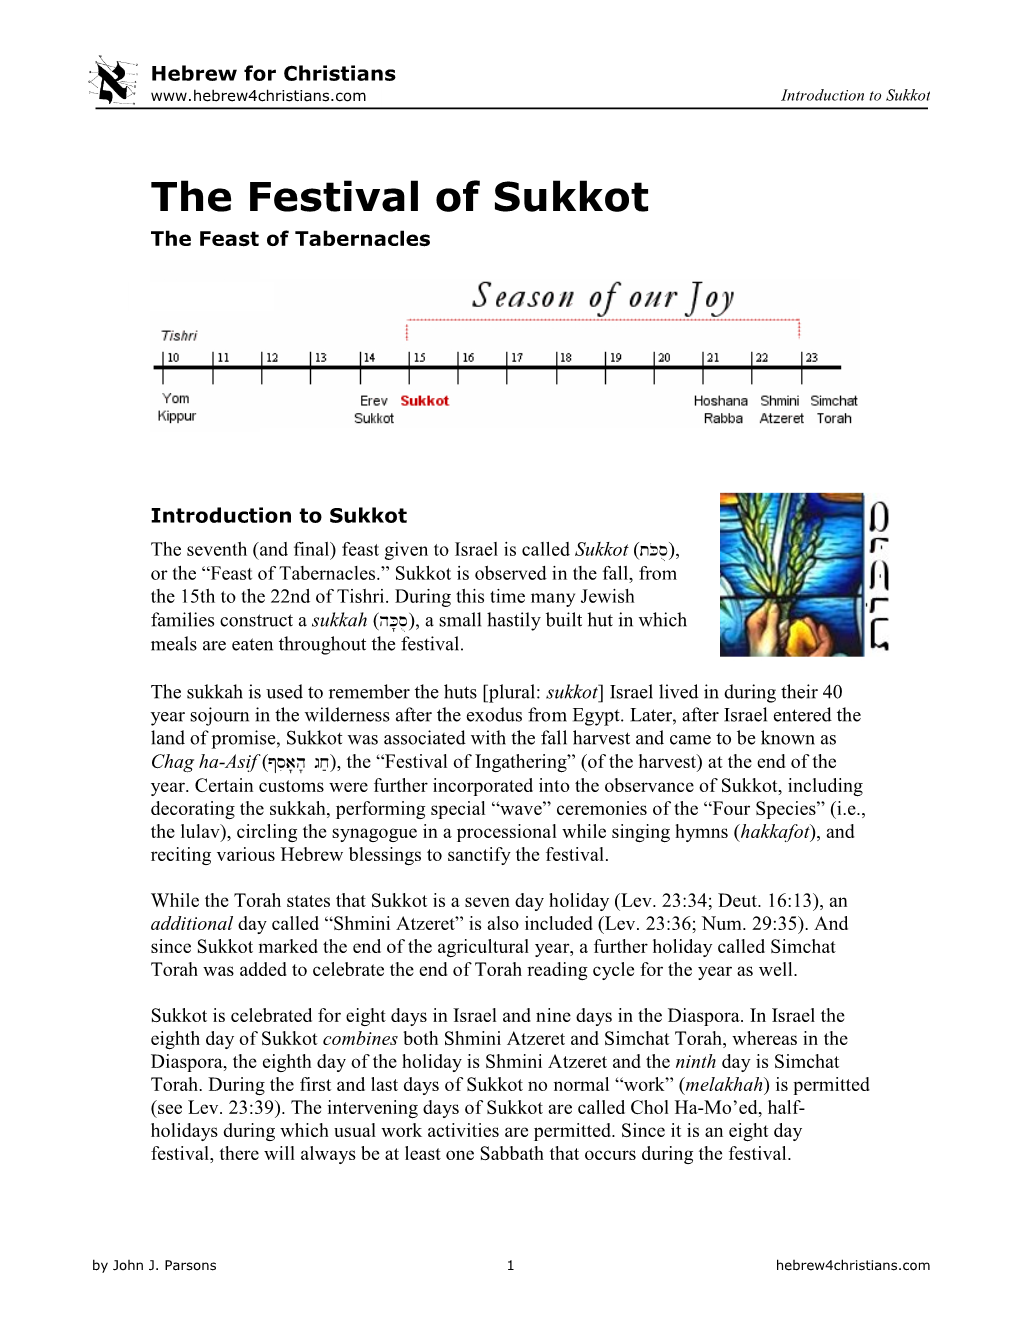 The Festival of Sukkot the Feast of Tabernacles